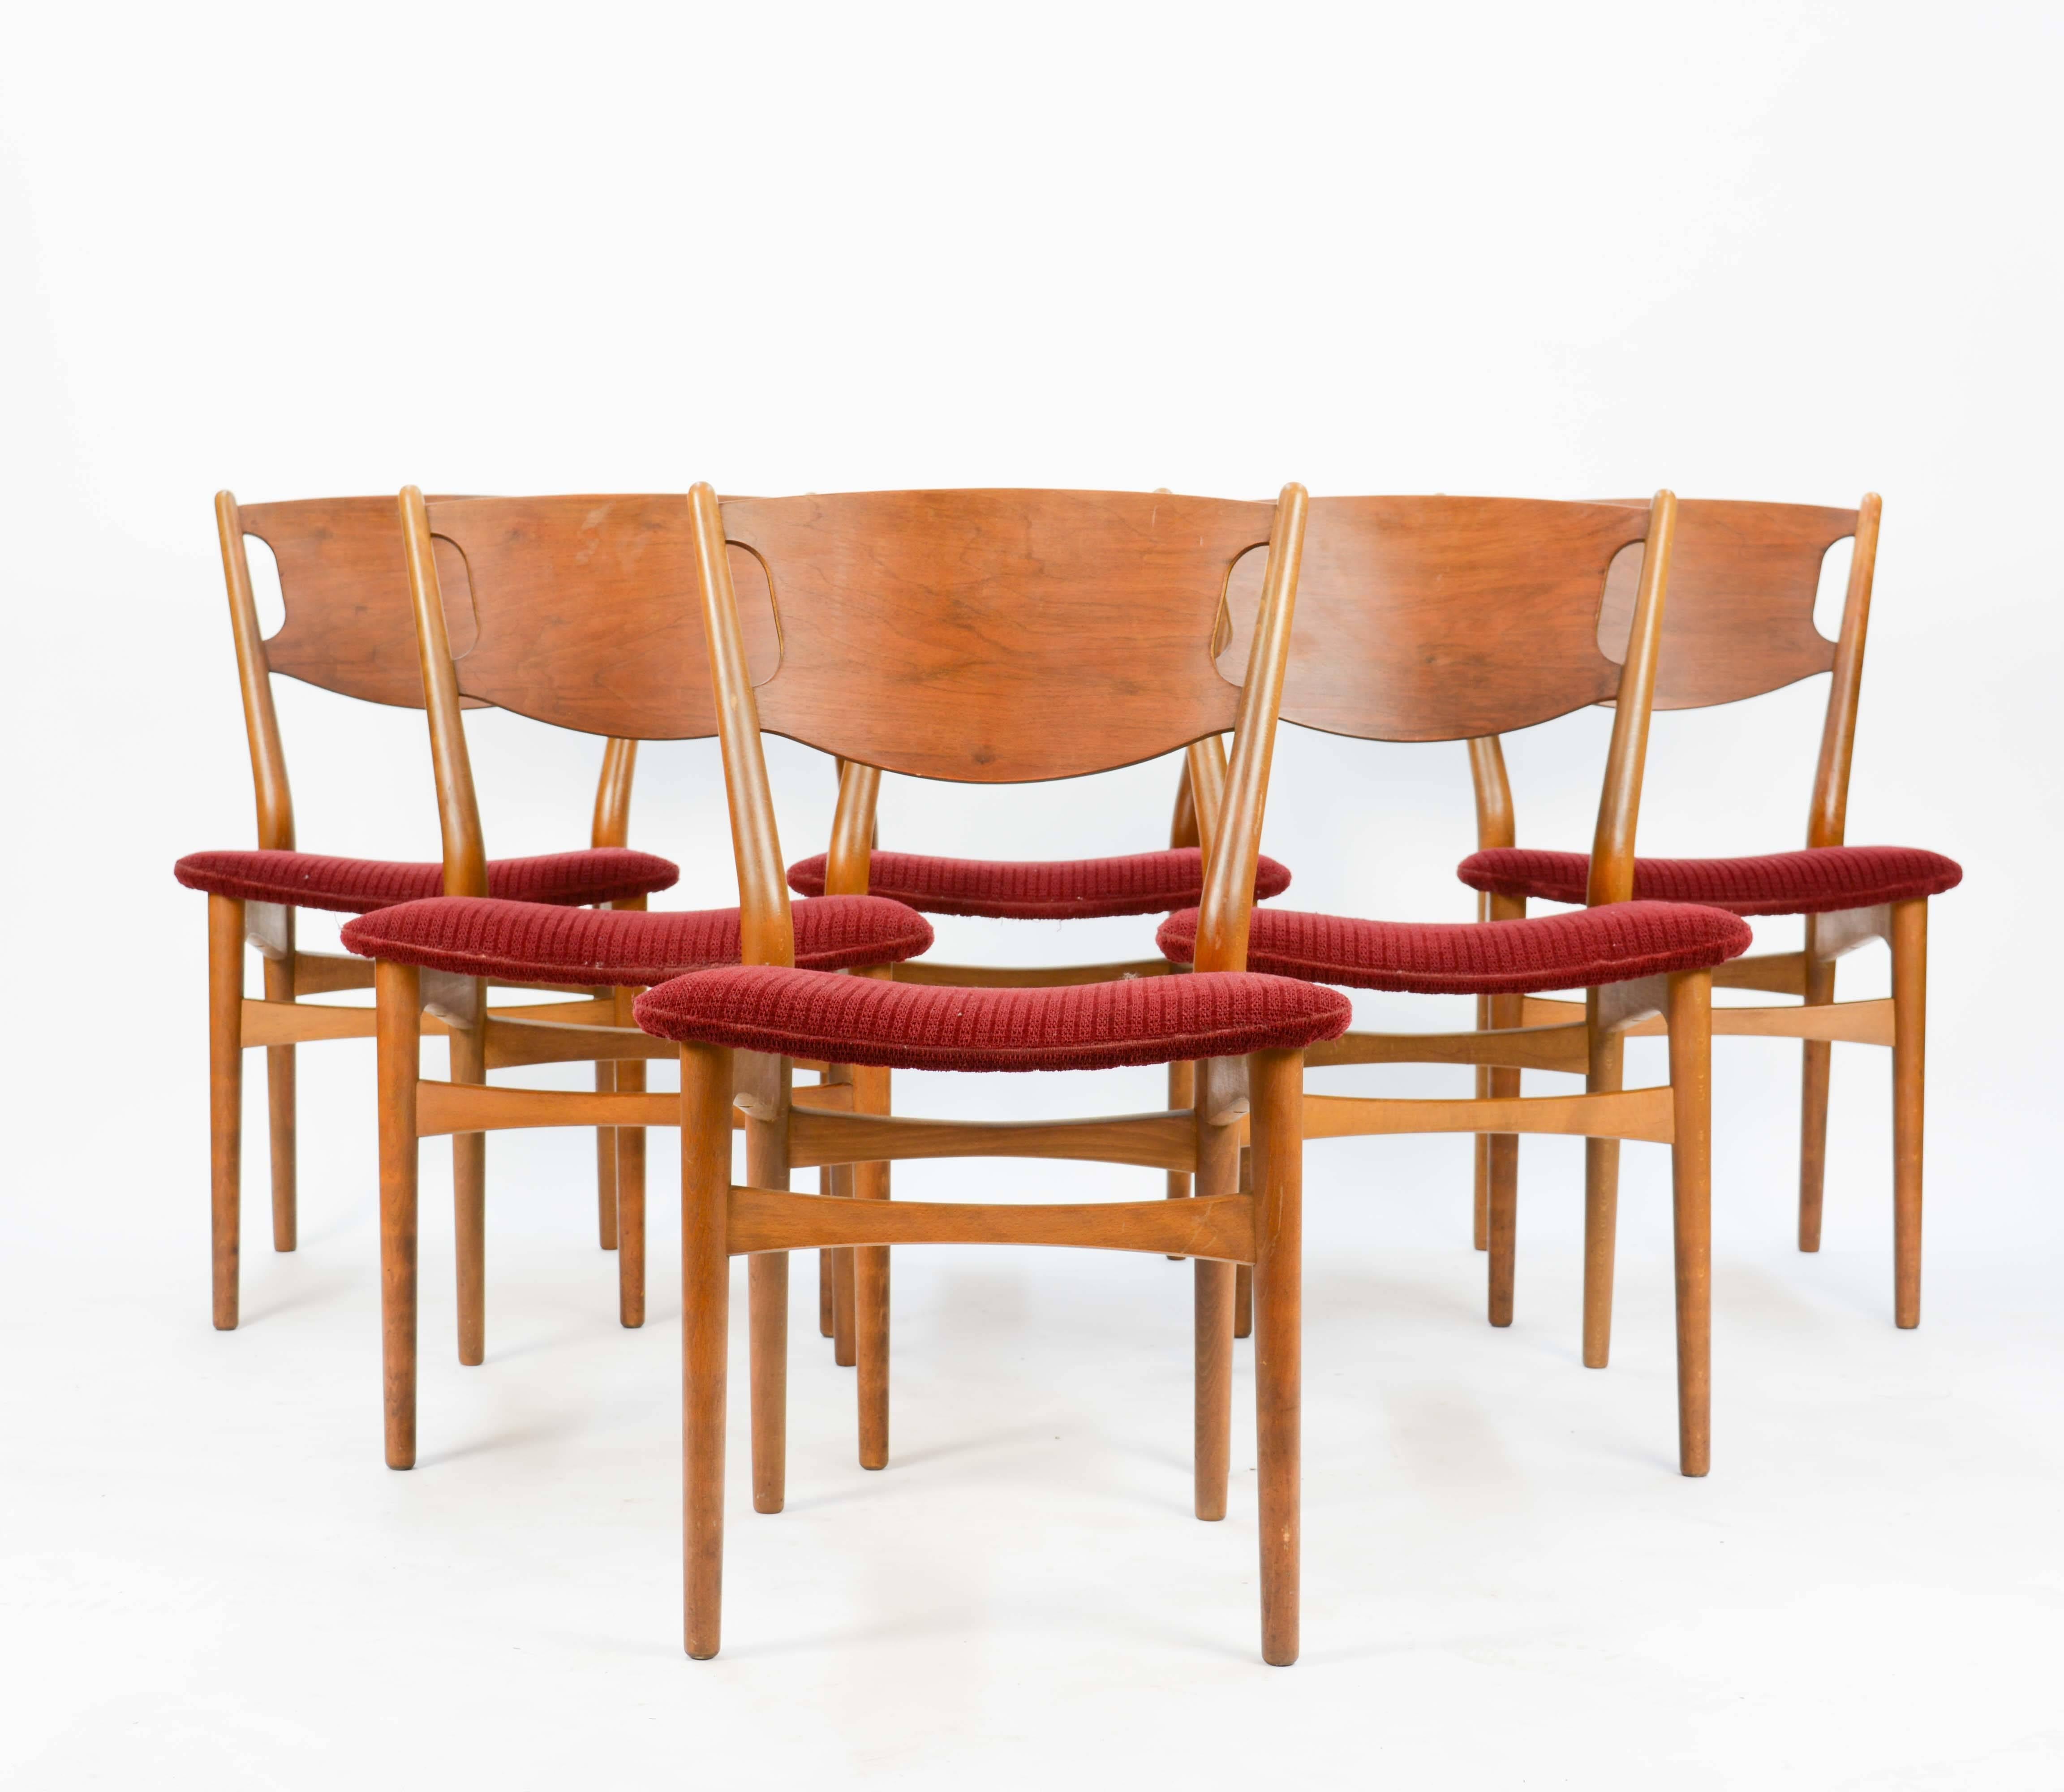 A set of six Wahl Iversen Danish dining chairs for Møbelfabriken Falster, 1954. In teak and walnut. Featuring wonderful graining and handsome seat backs. These chair very comfortable.